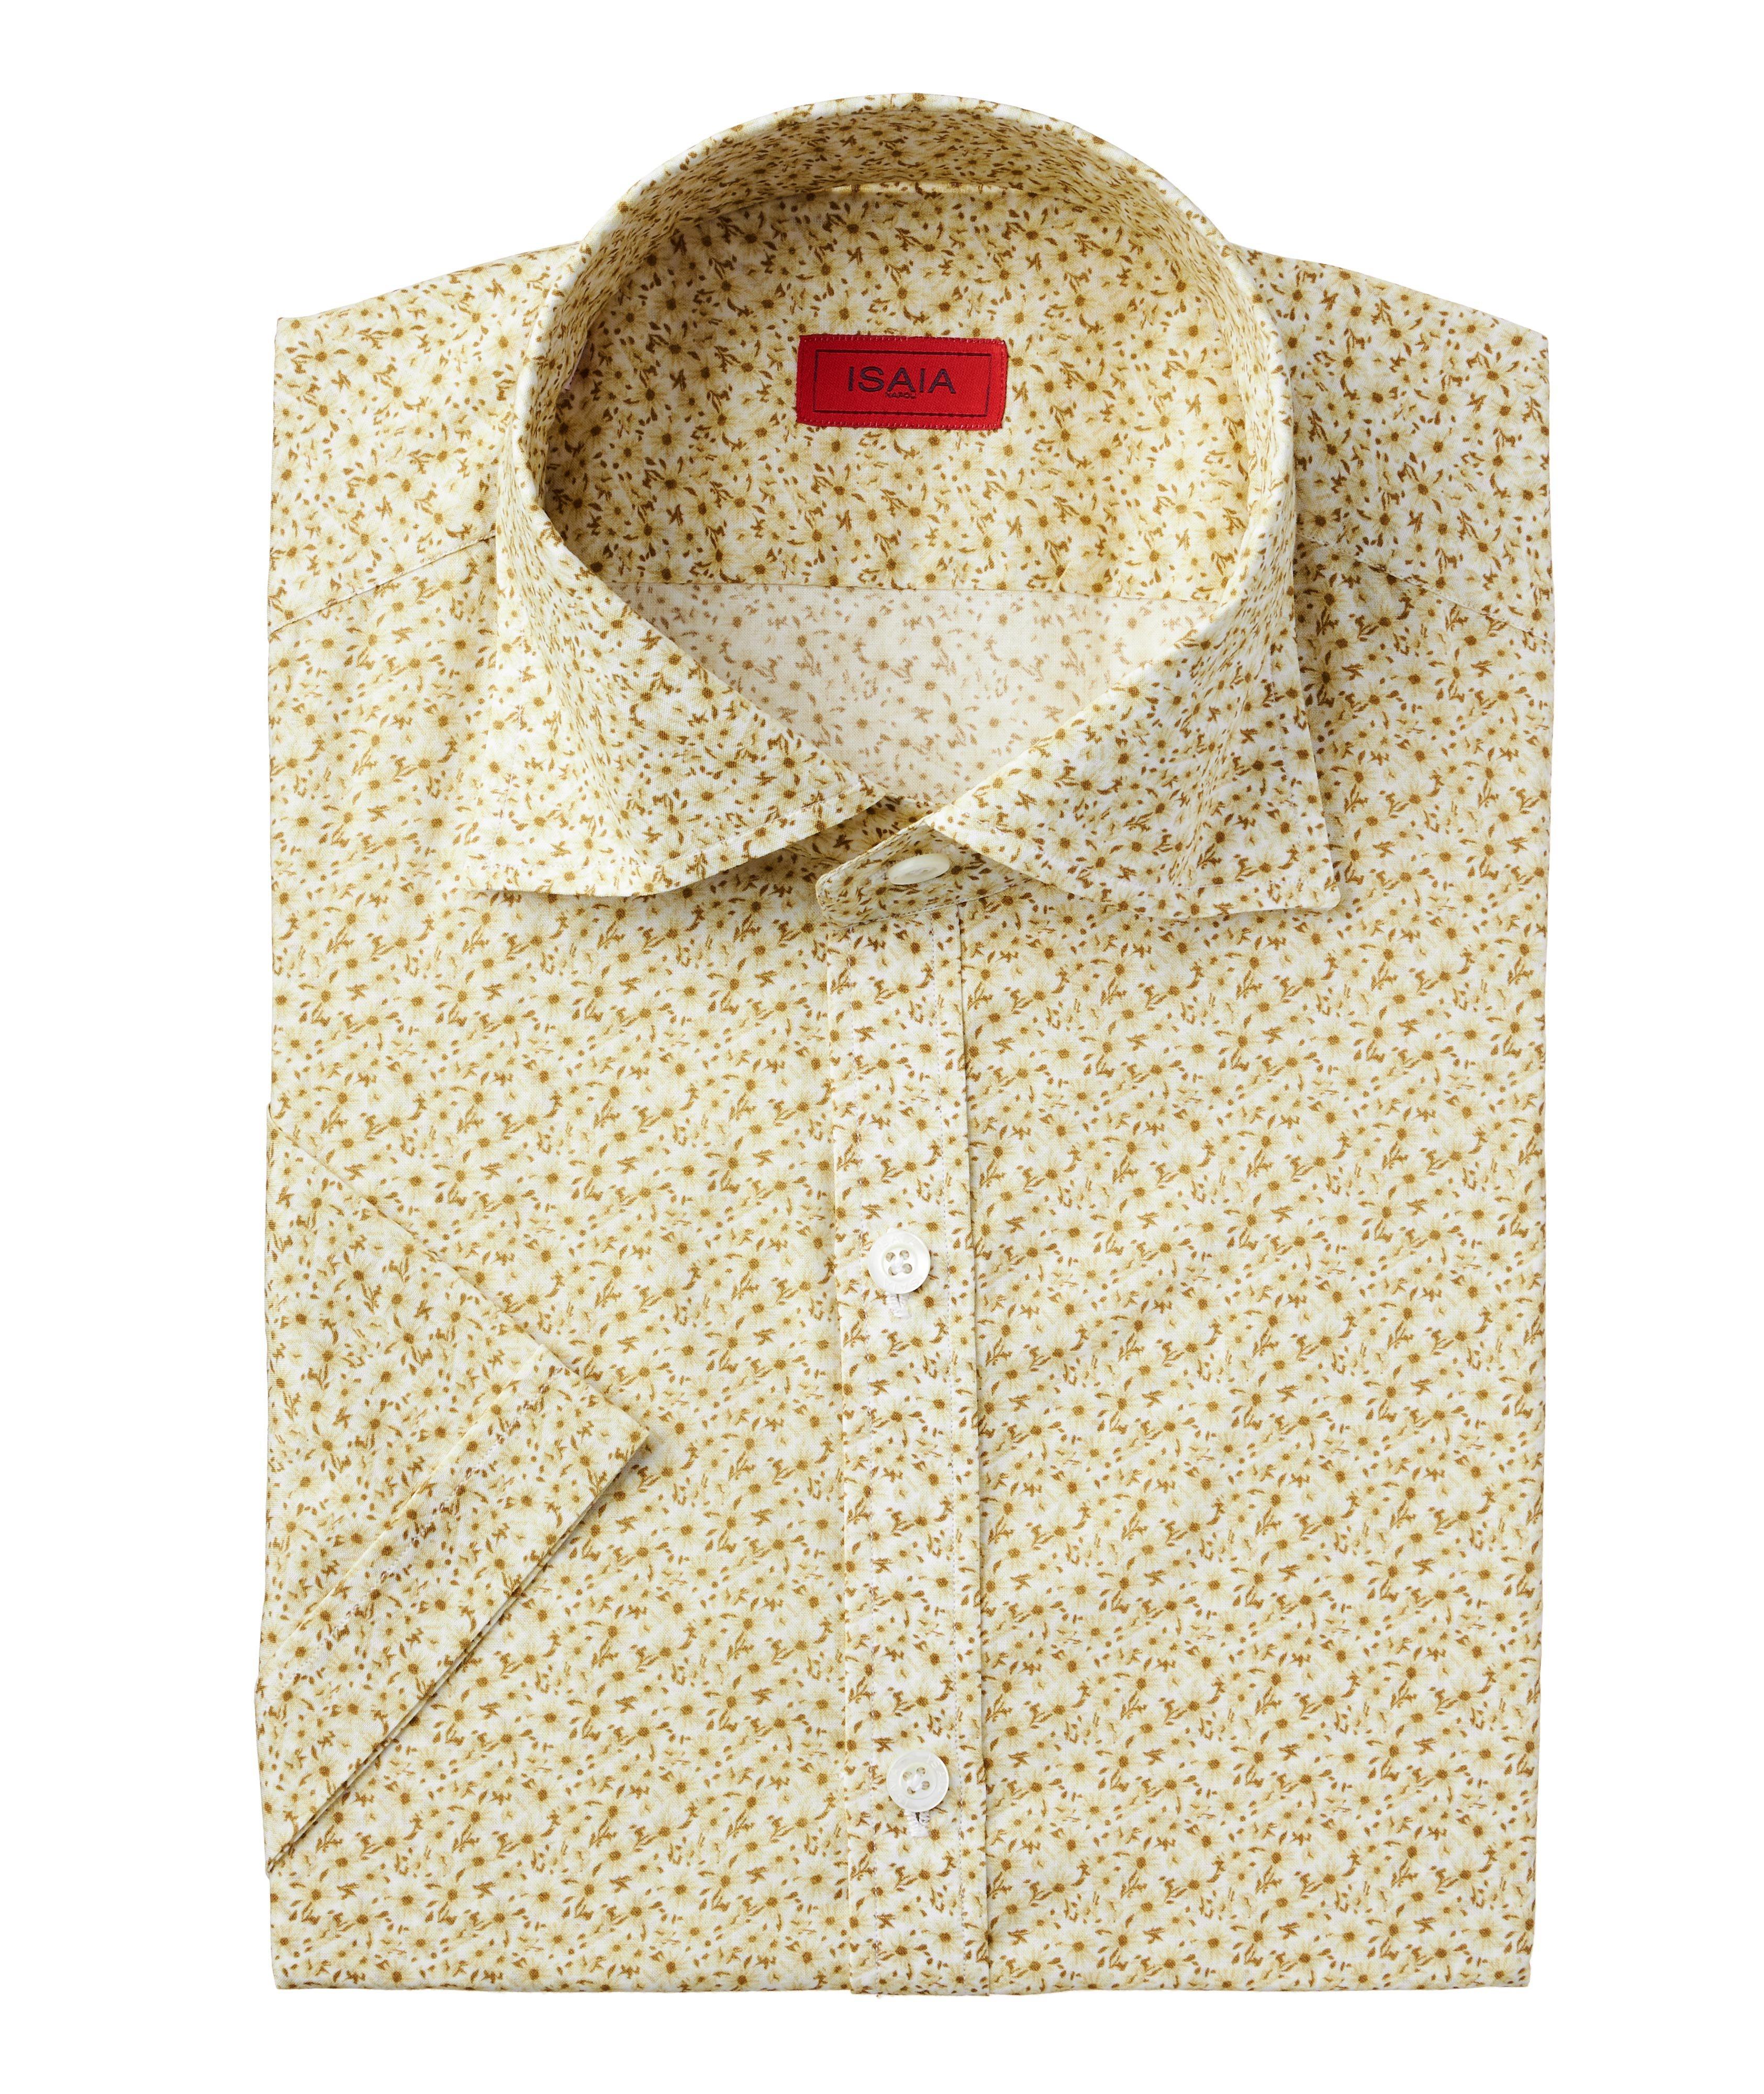 Contemporary-Fit Floral Shirt image 0